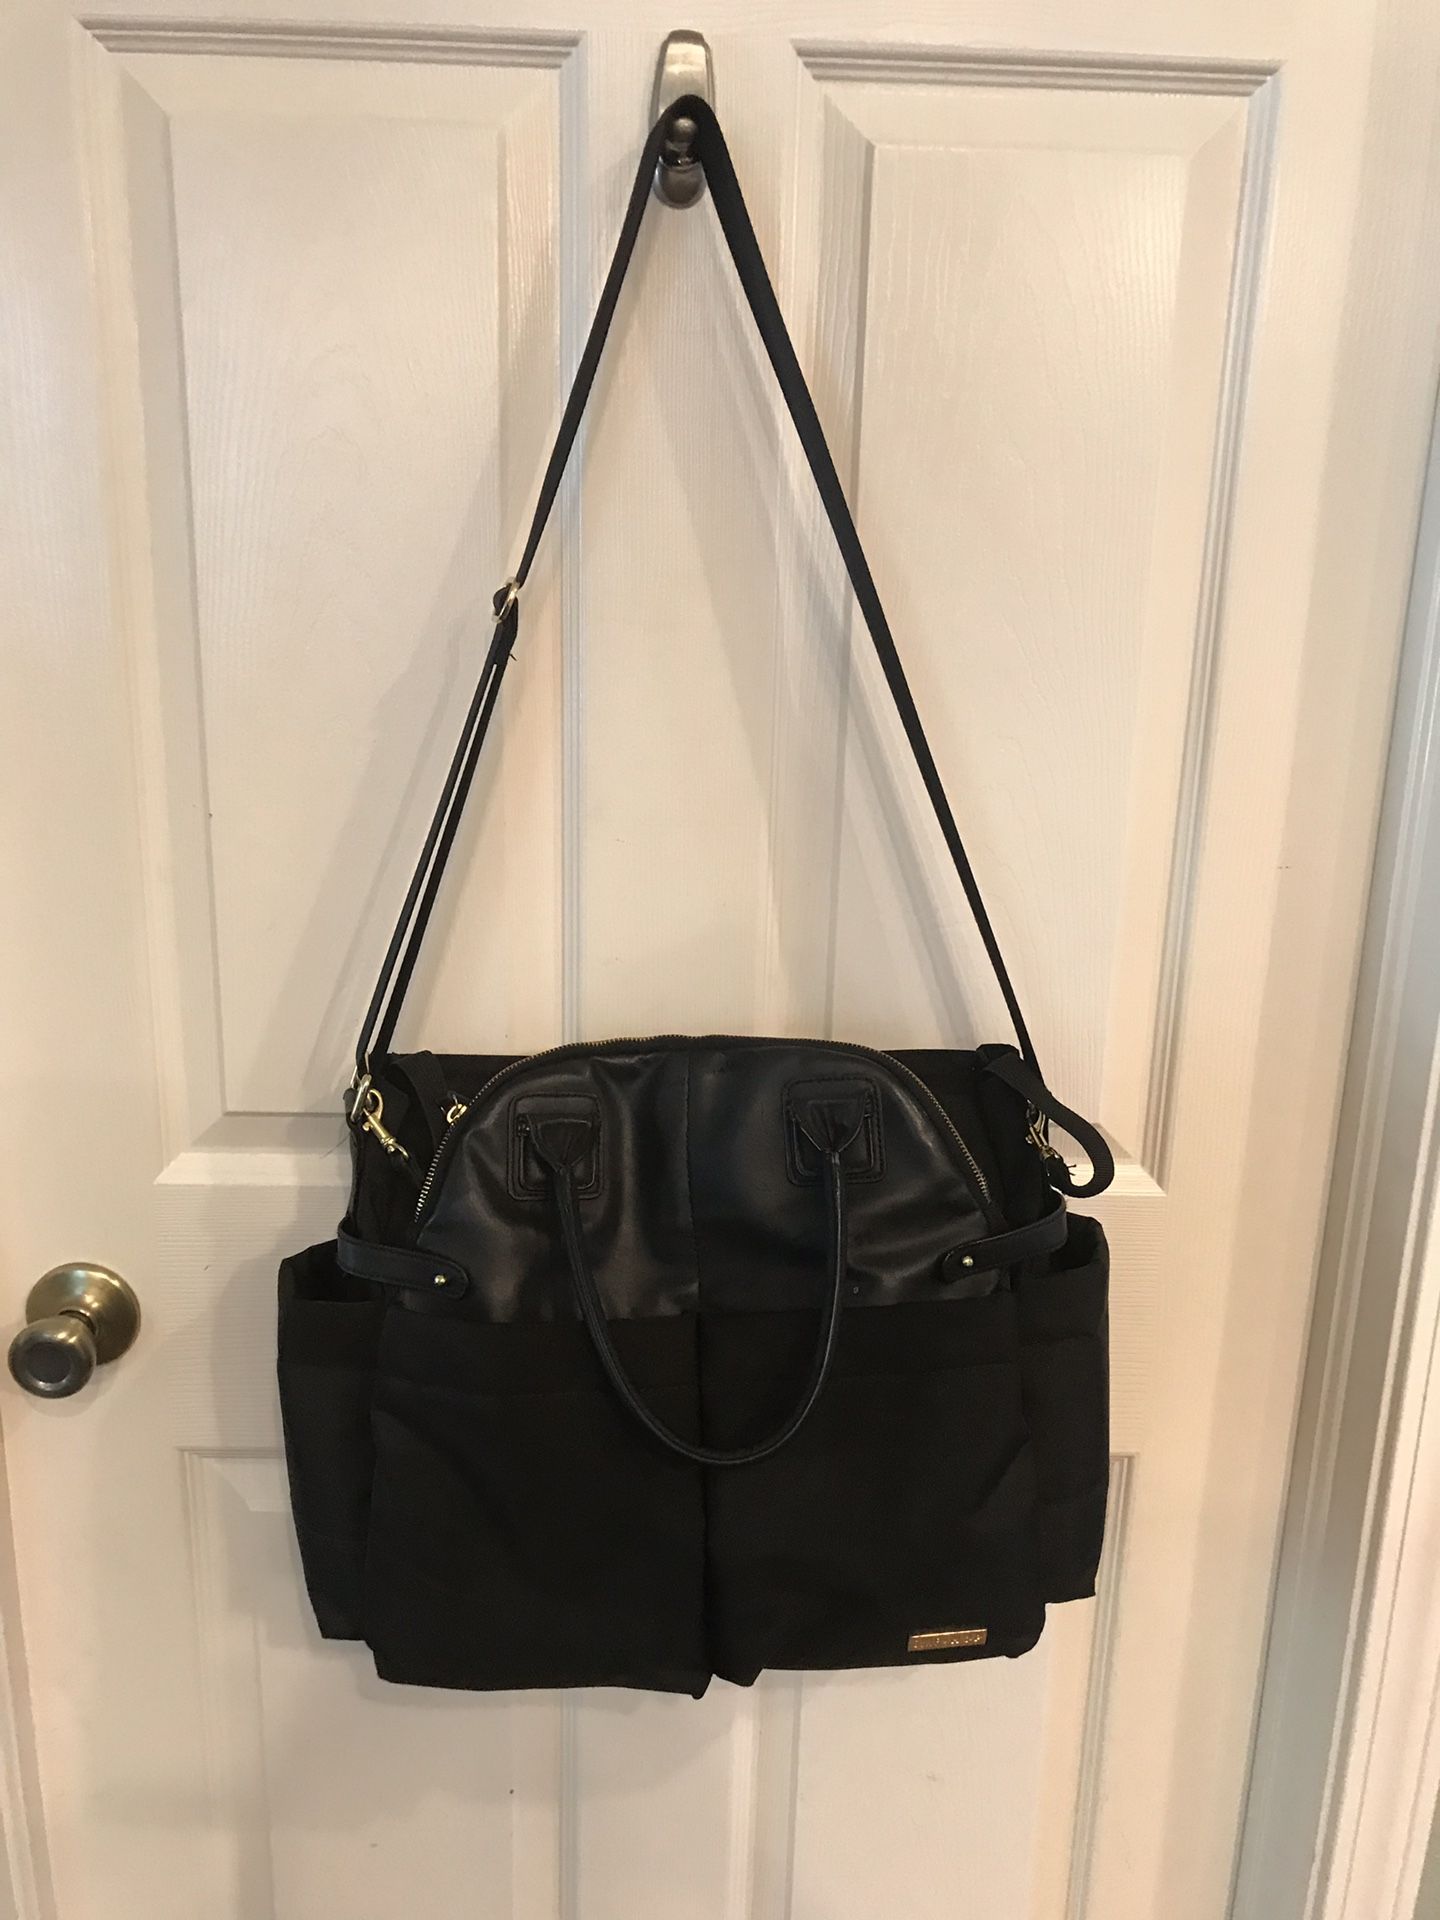 Skip Hop Black Diaper Bag with baby changing pad